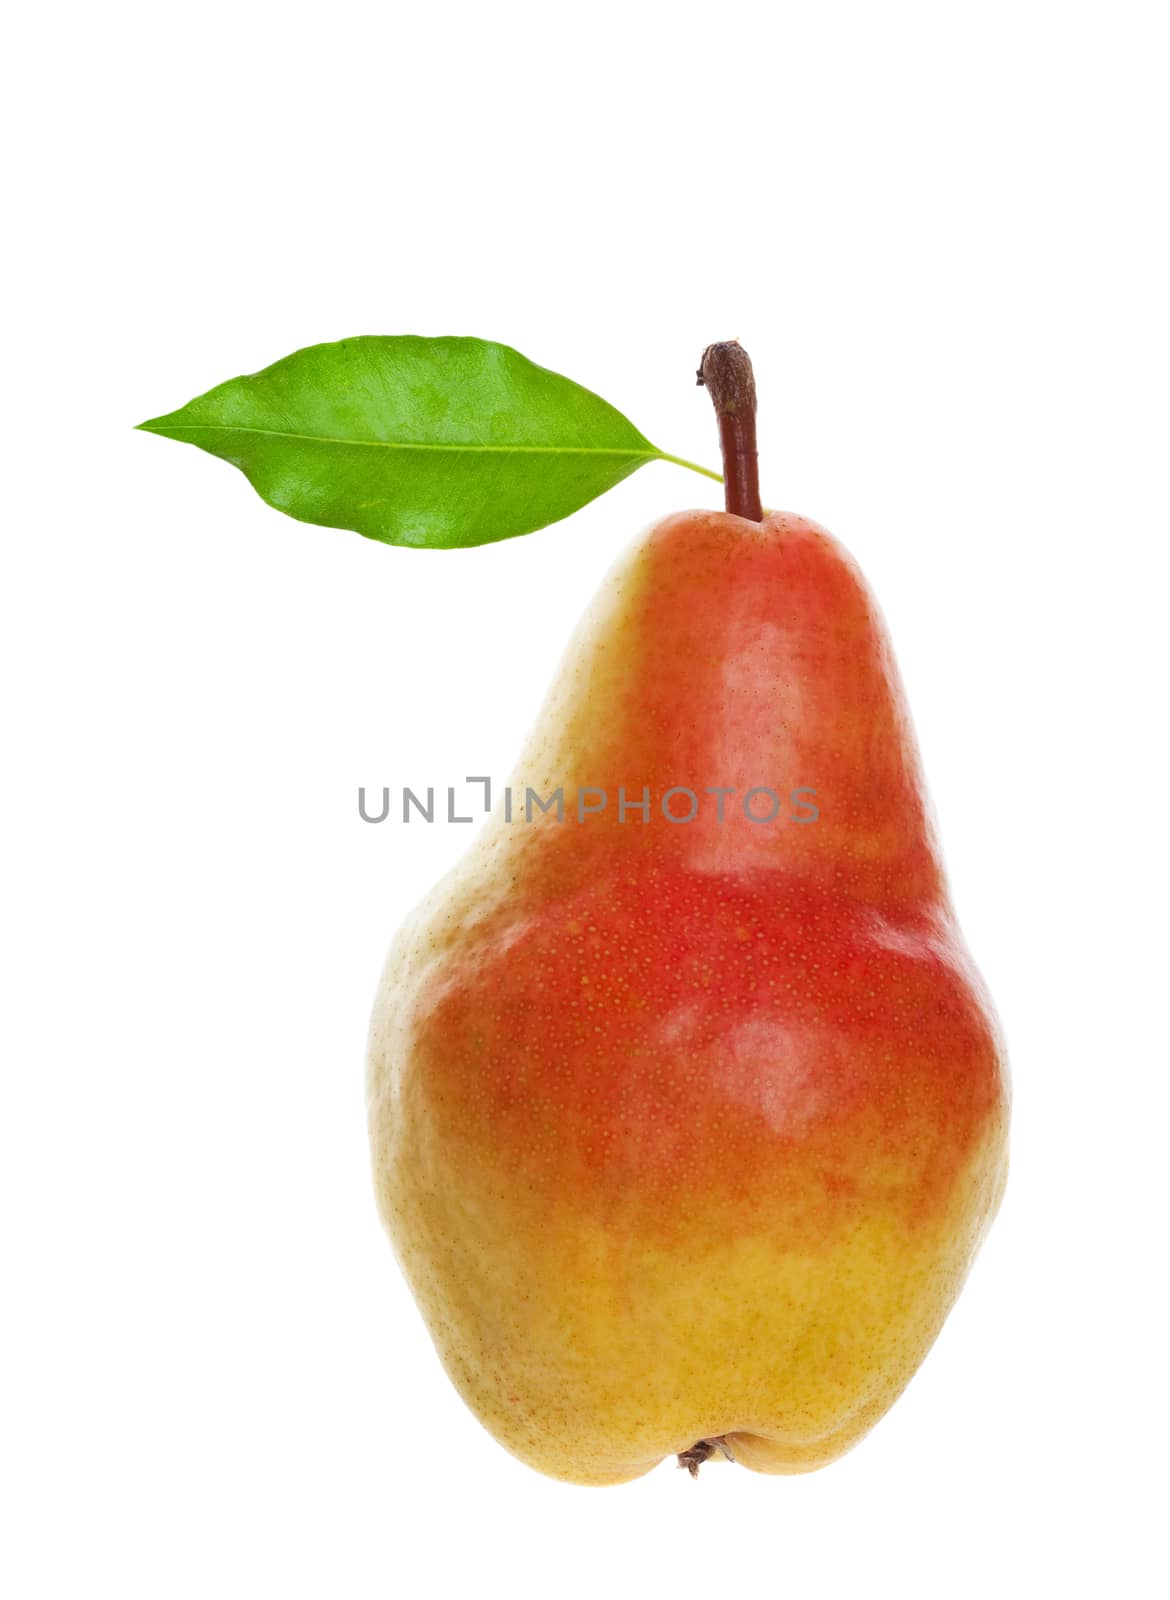 A fully-ripened, freshly picked pear with leaf still attached.  Shot on white background.